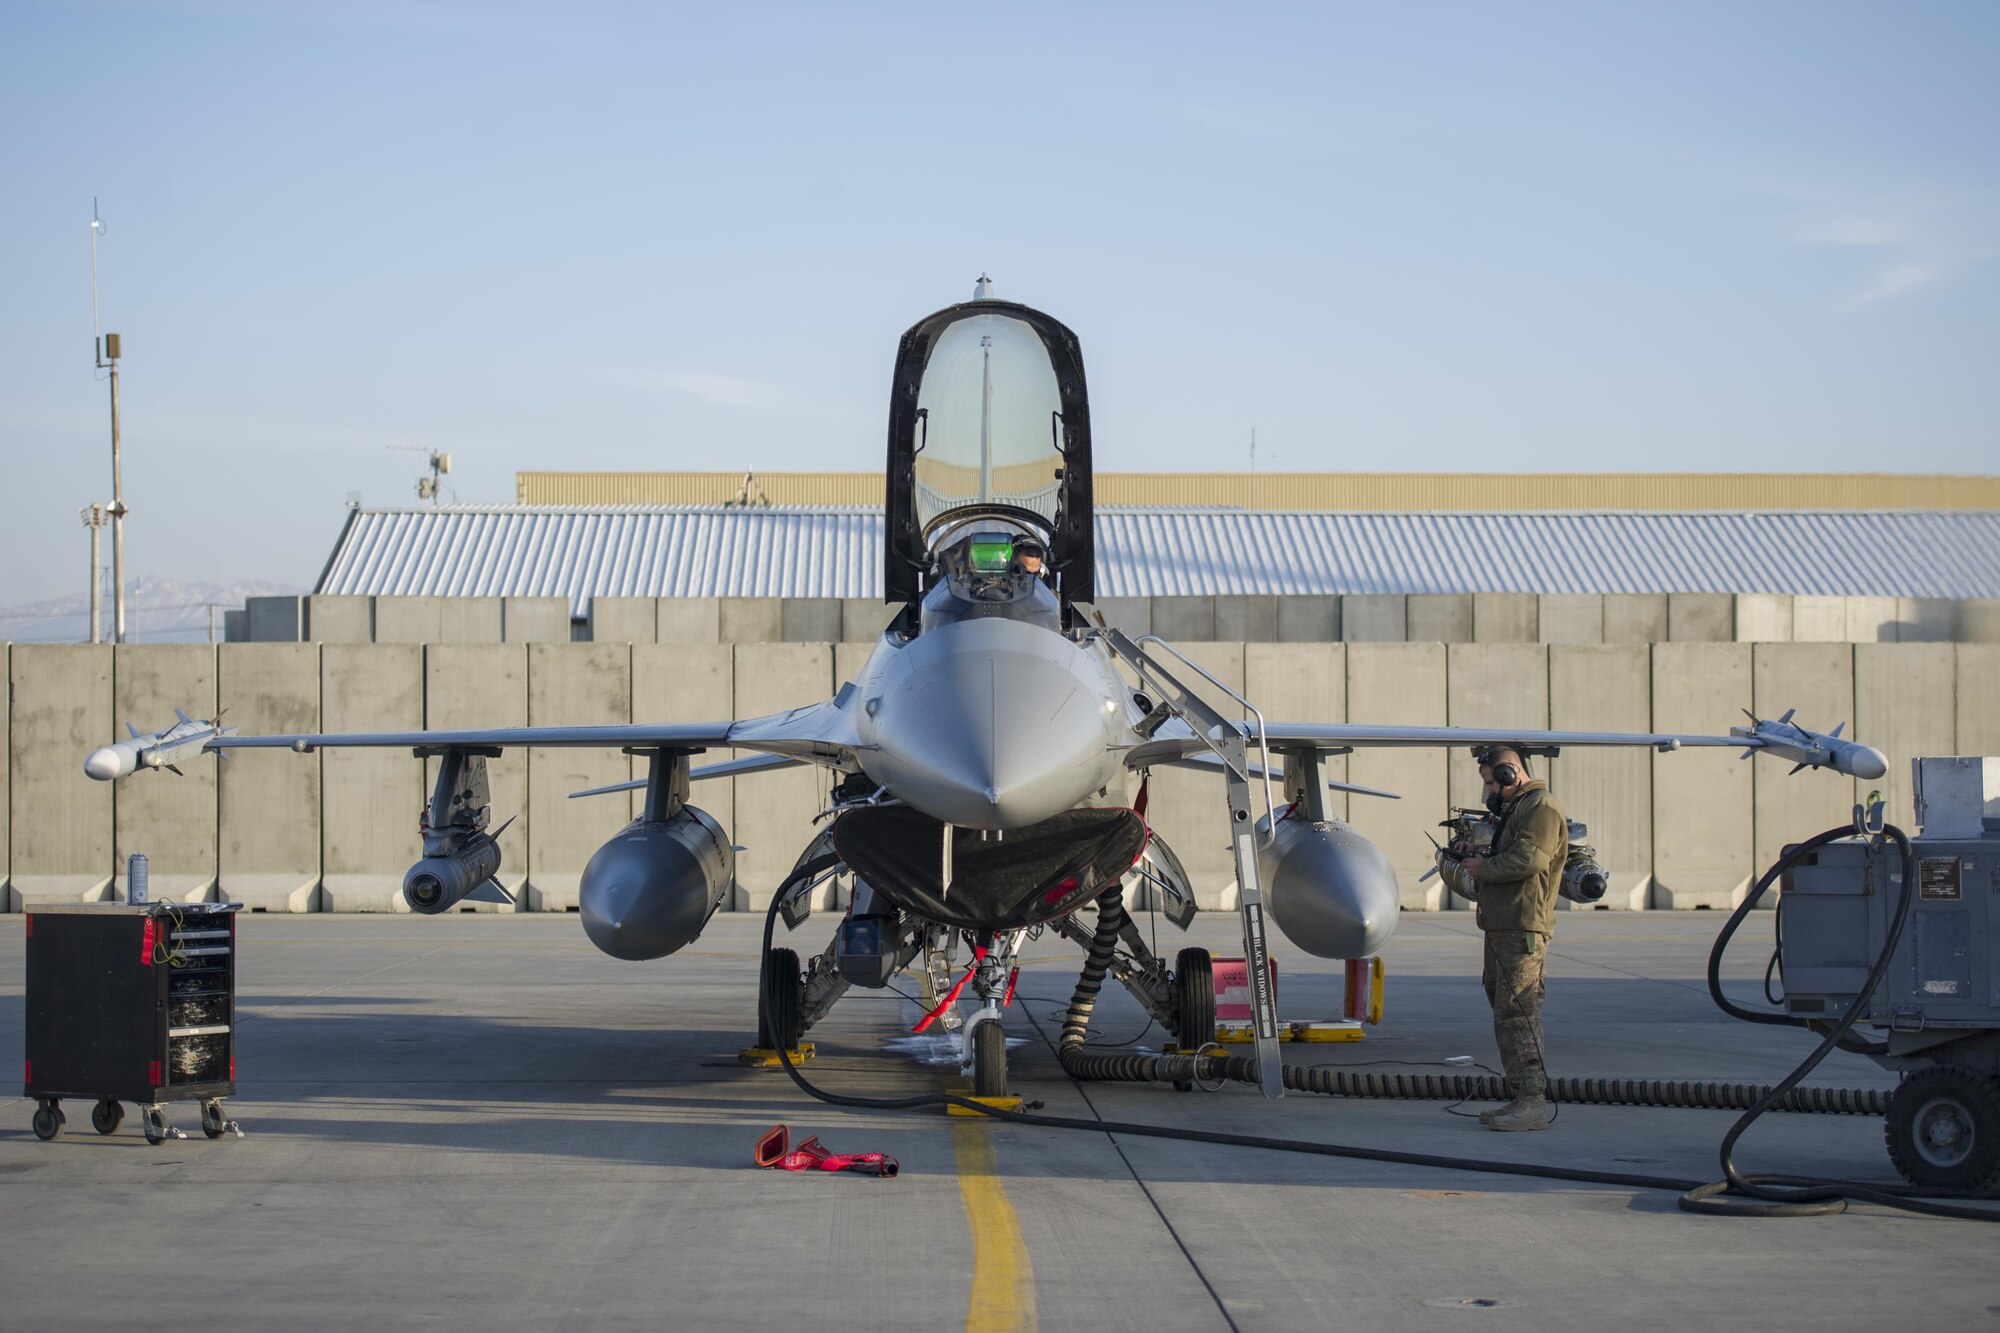 Tech. Sgt. Ritchie Videna (cockpit) and Staff Sgt. Matthew Crabtree (right), 455th Expeditionary Aircraft Maintenance Squadron avionics systems technicians, perform a chaff and flare operations check on an F-16 Fighting Falcon at Bagram Airfield, Afghanistan, Jan. 8, 2016. The 455th EAMXS provides combat-ready aircraft to the air component commander in support of coalition forces throughout Afghanistan. (U.S. Air Force photo/Tech. Sgt. Robert Cloys)